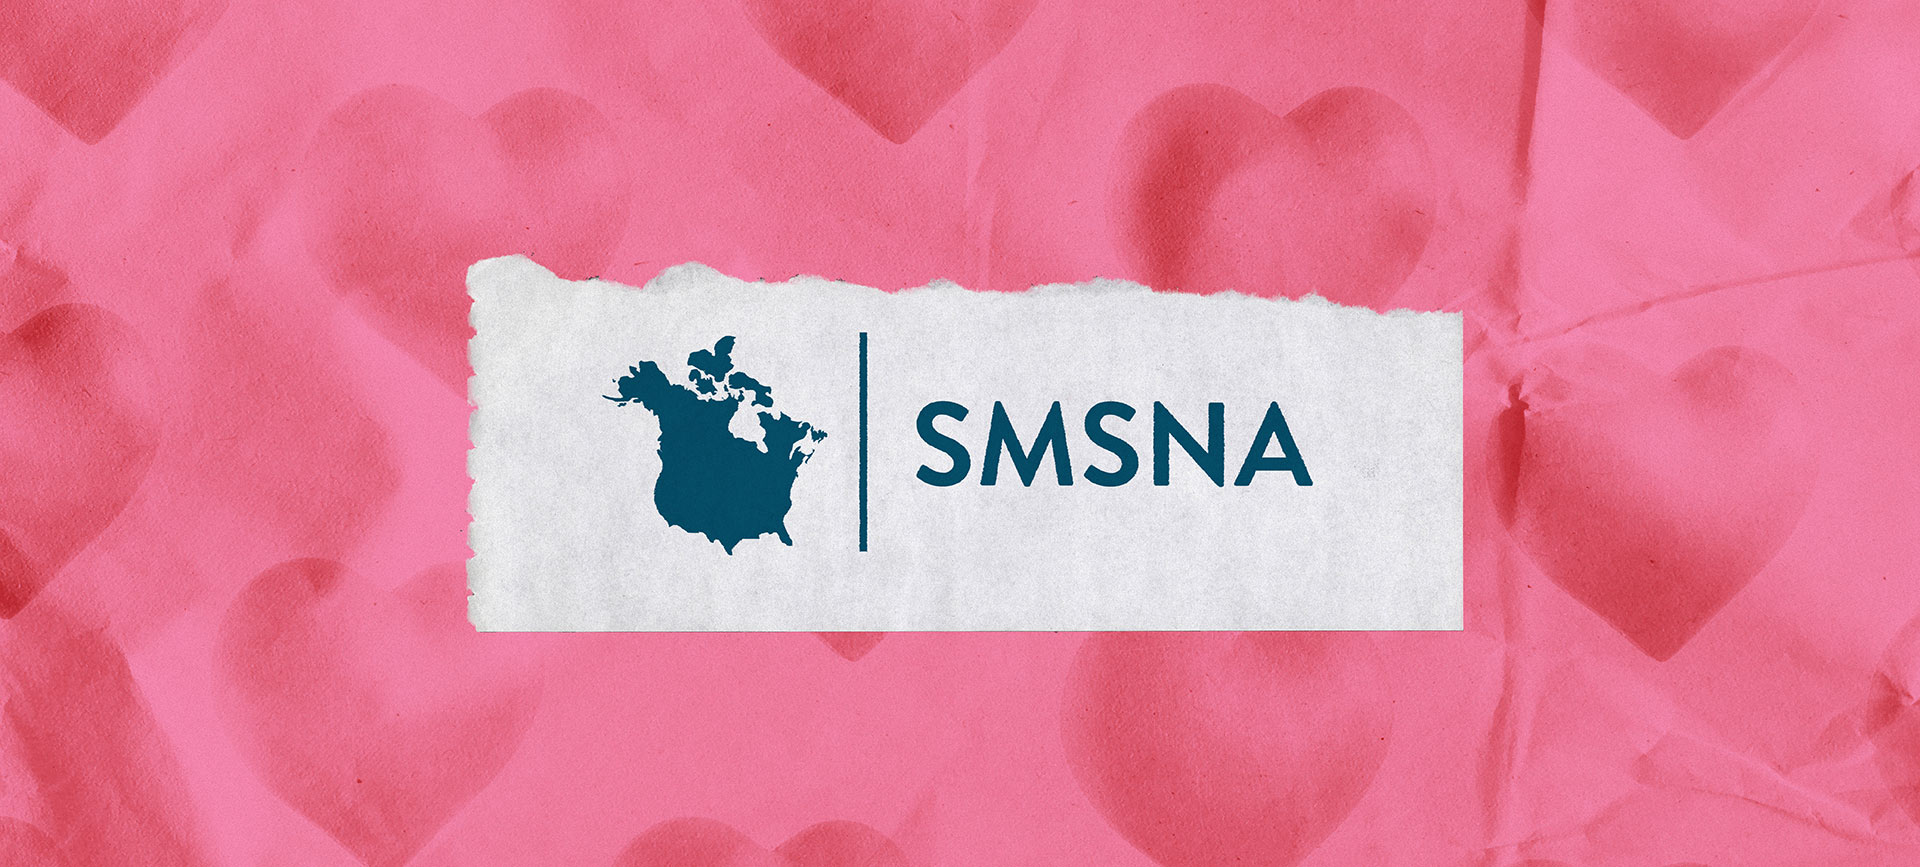 The logo for the Sexual Medicine Society of North America is against a pink background of faded hearts.